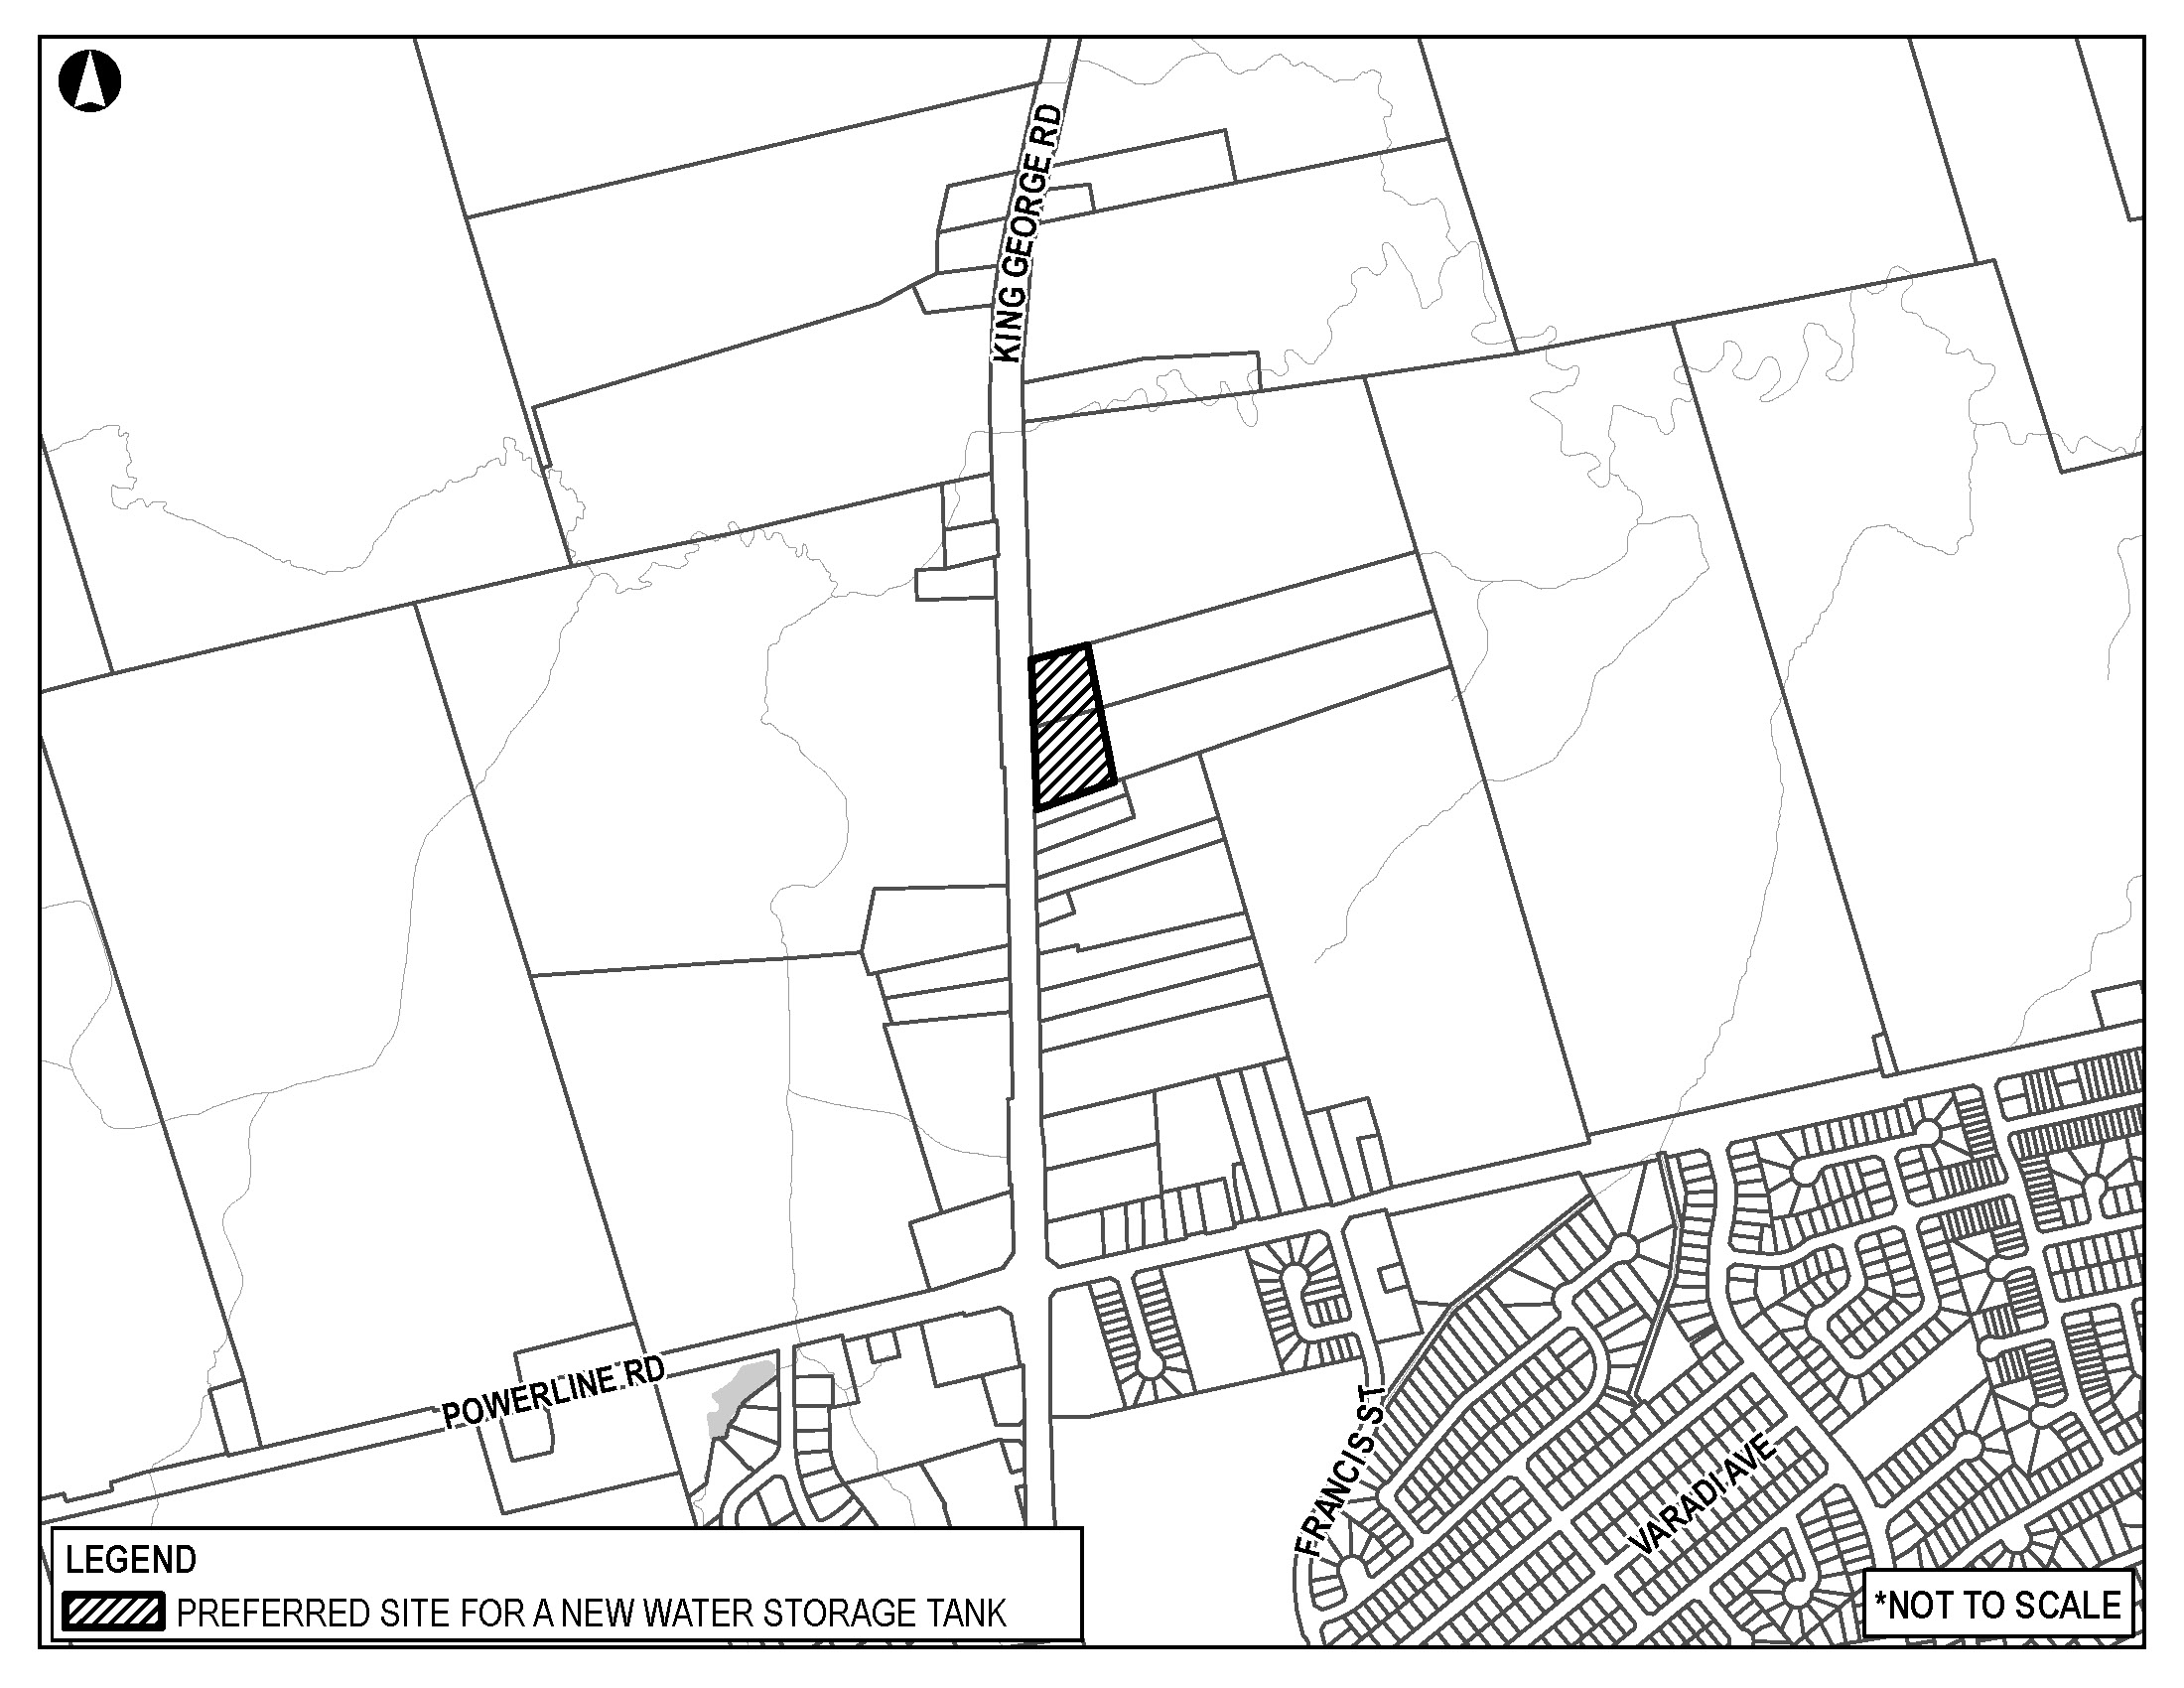 Map showing the preferred site for a new water storage tank on King George Road.